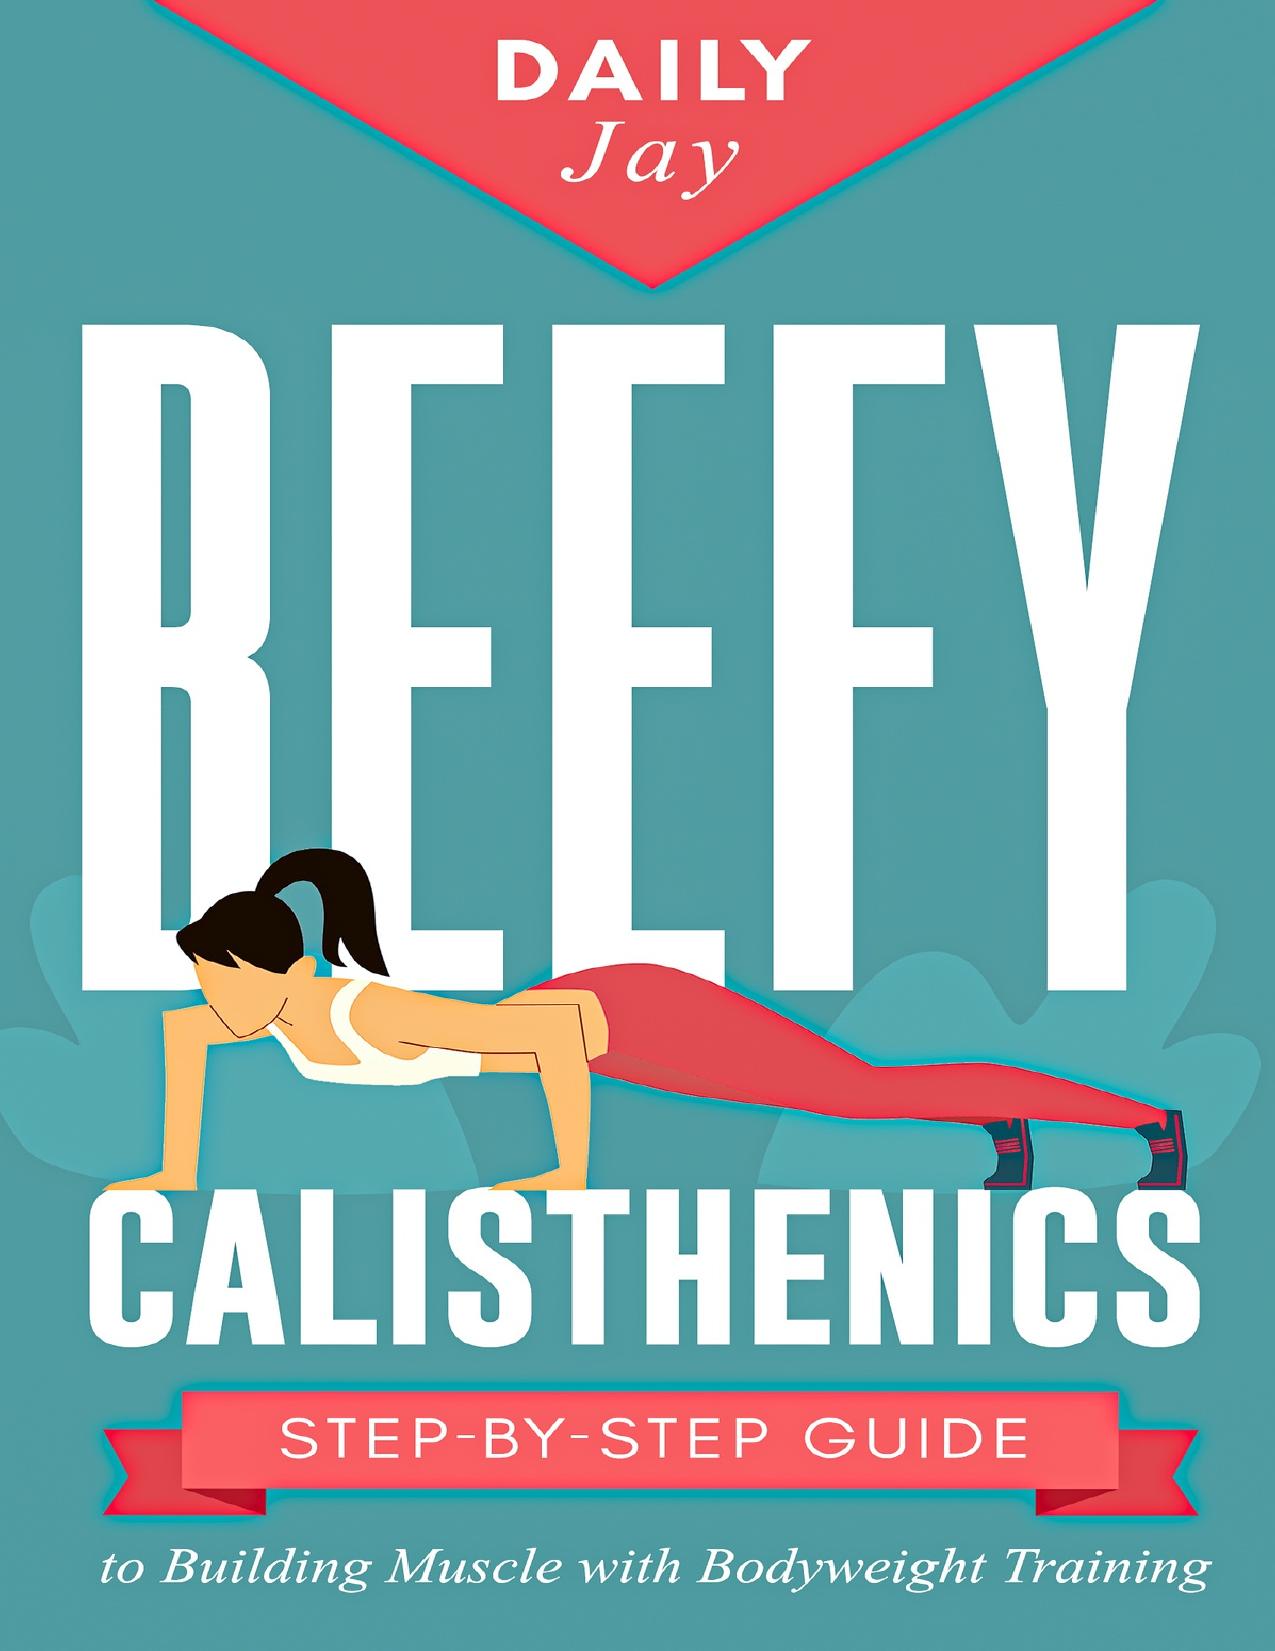 Beefy Calisthenics: Step-by-Step Guide to Building Muscle with Bodyweight Training by Jay Daily